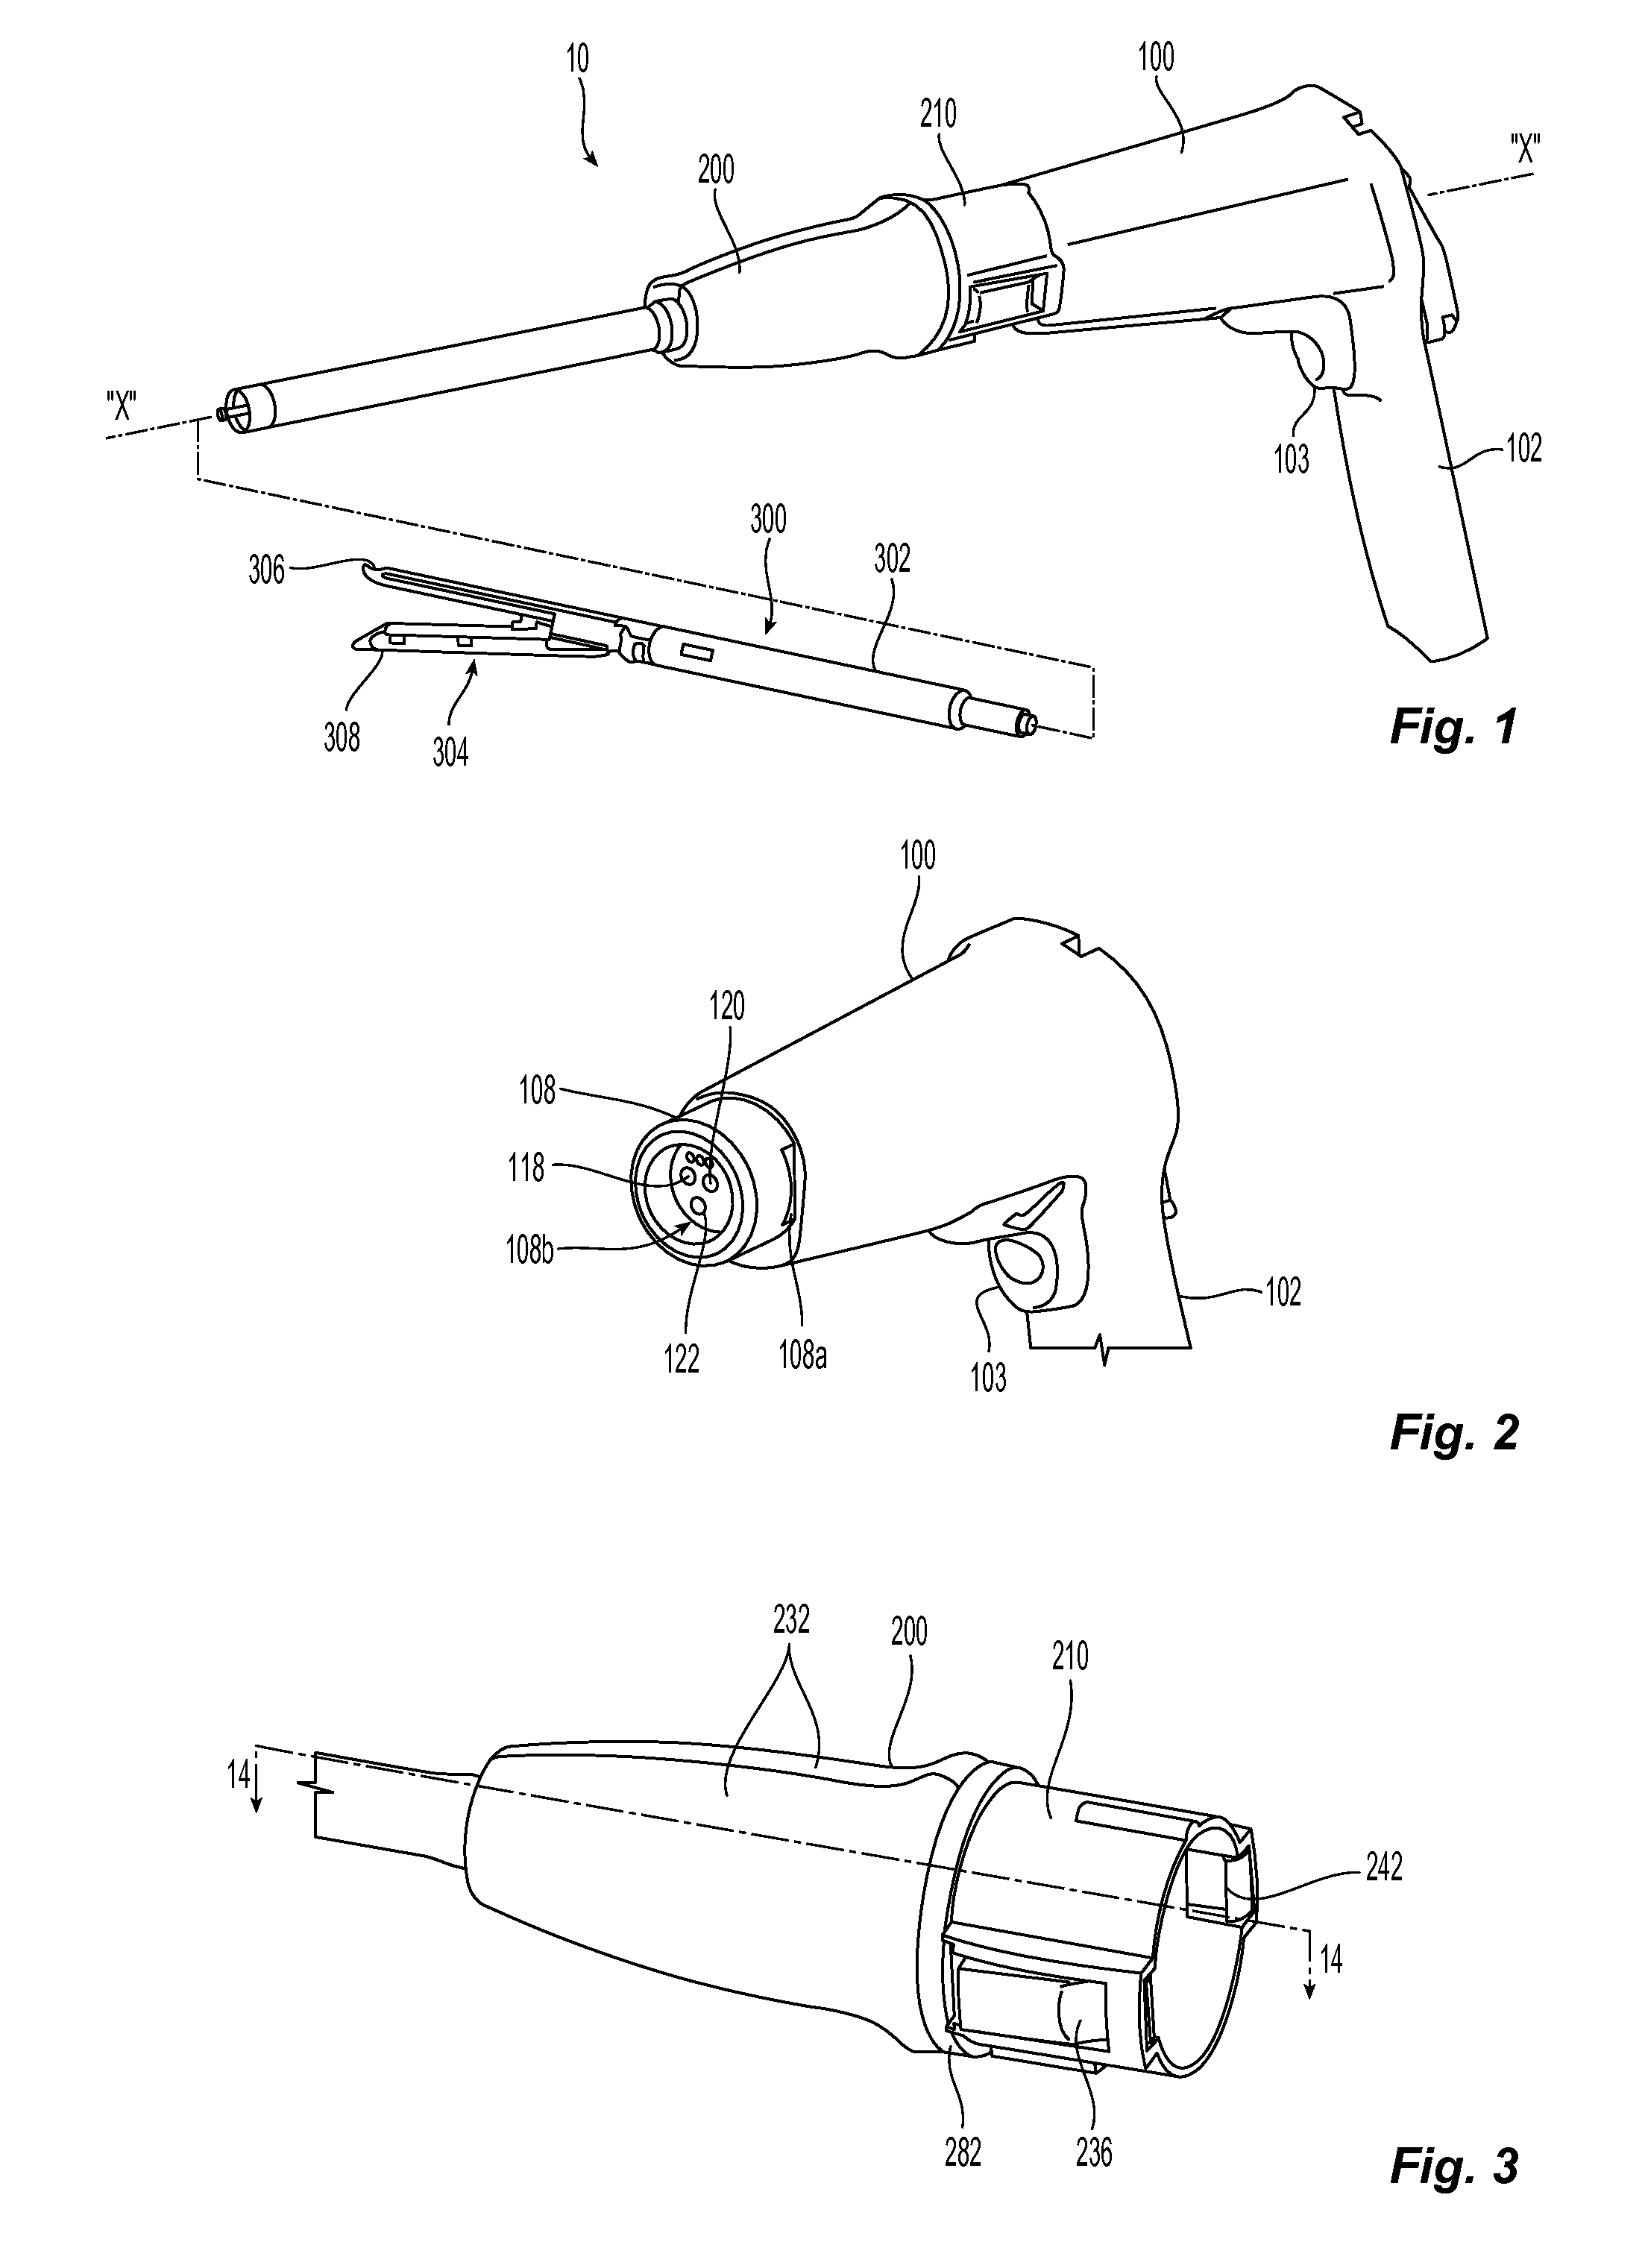 Adapter direct drive with manual retraction, lockout and connection mechanisms